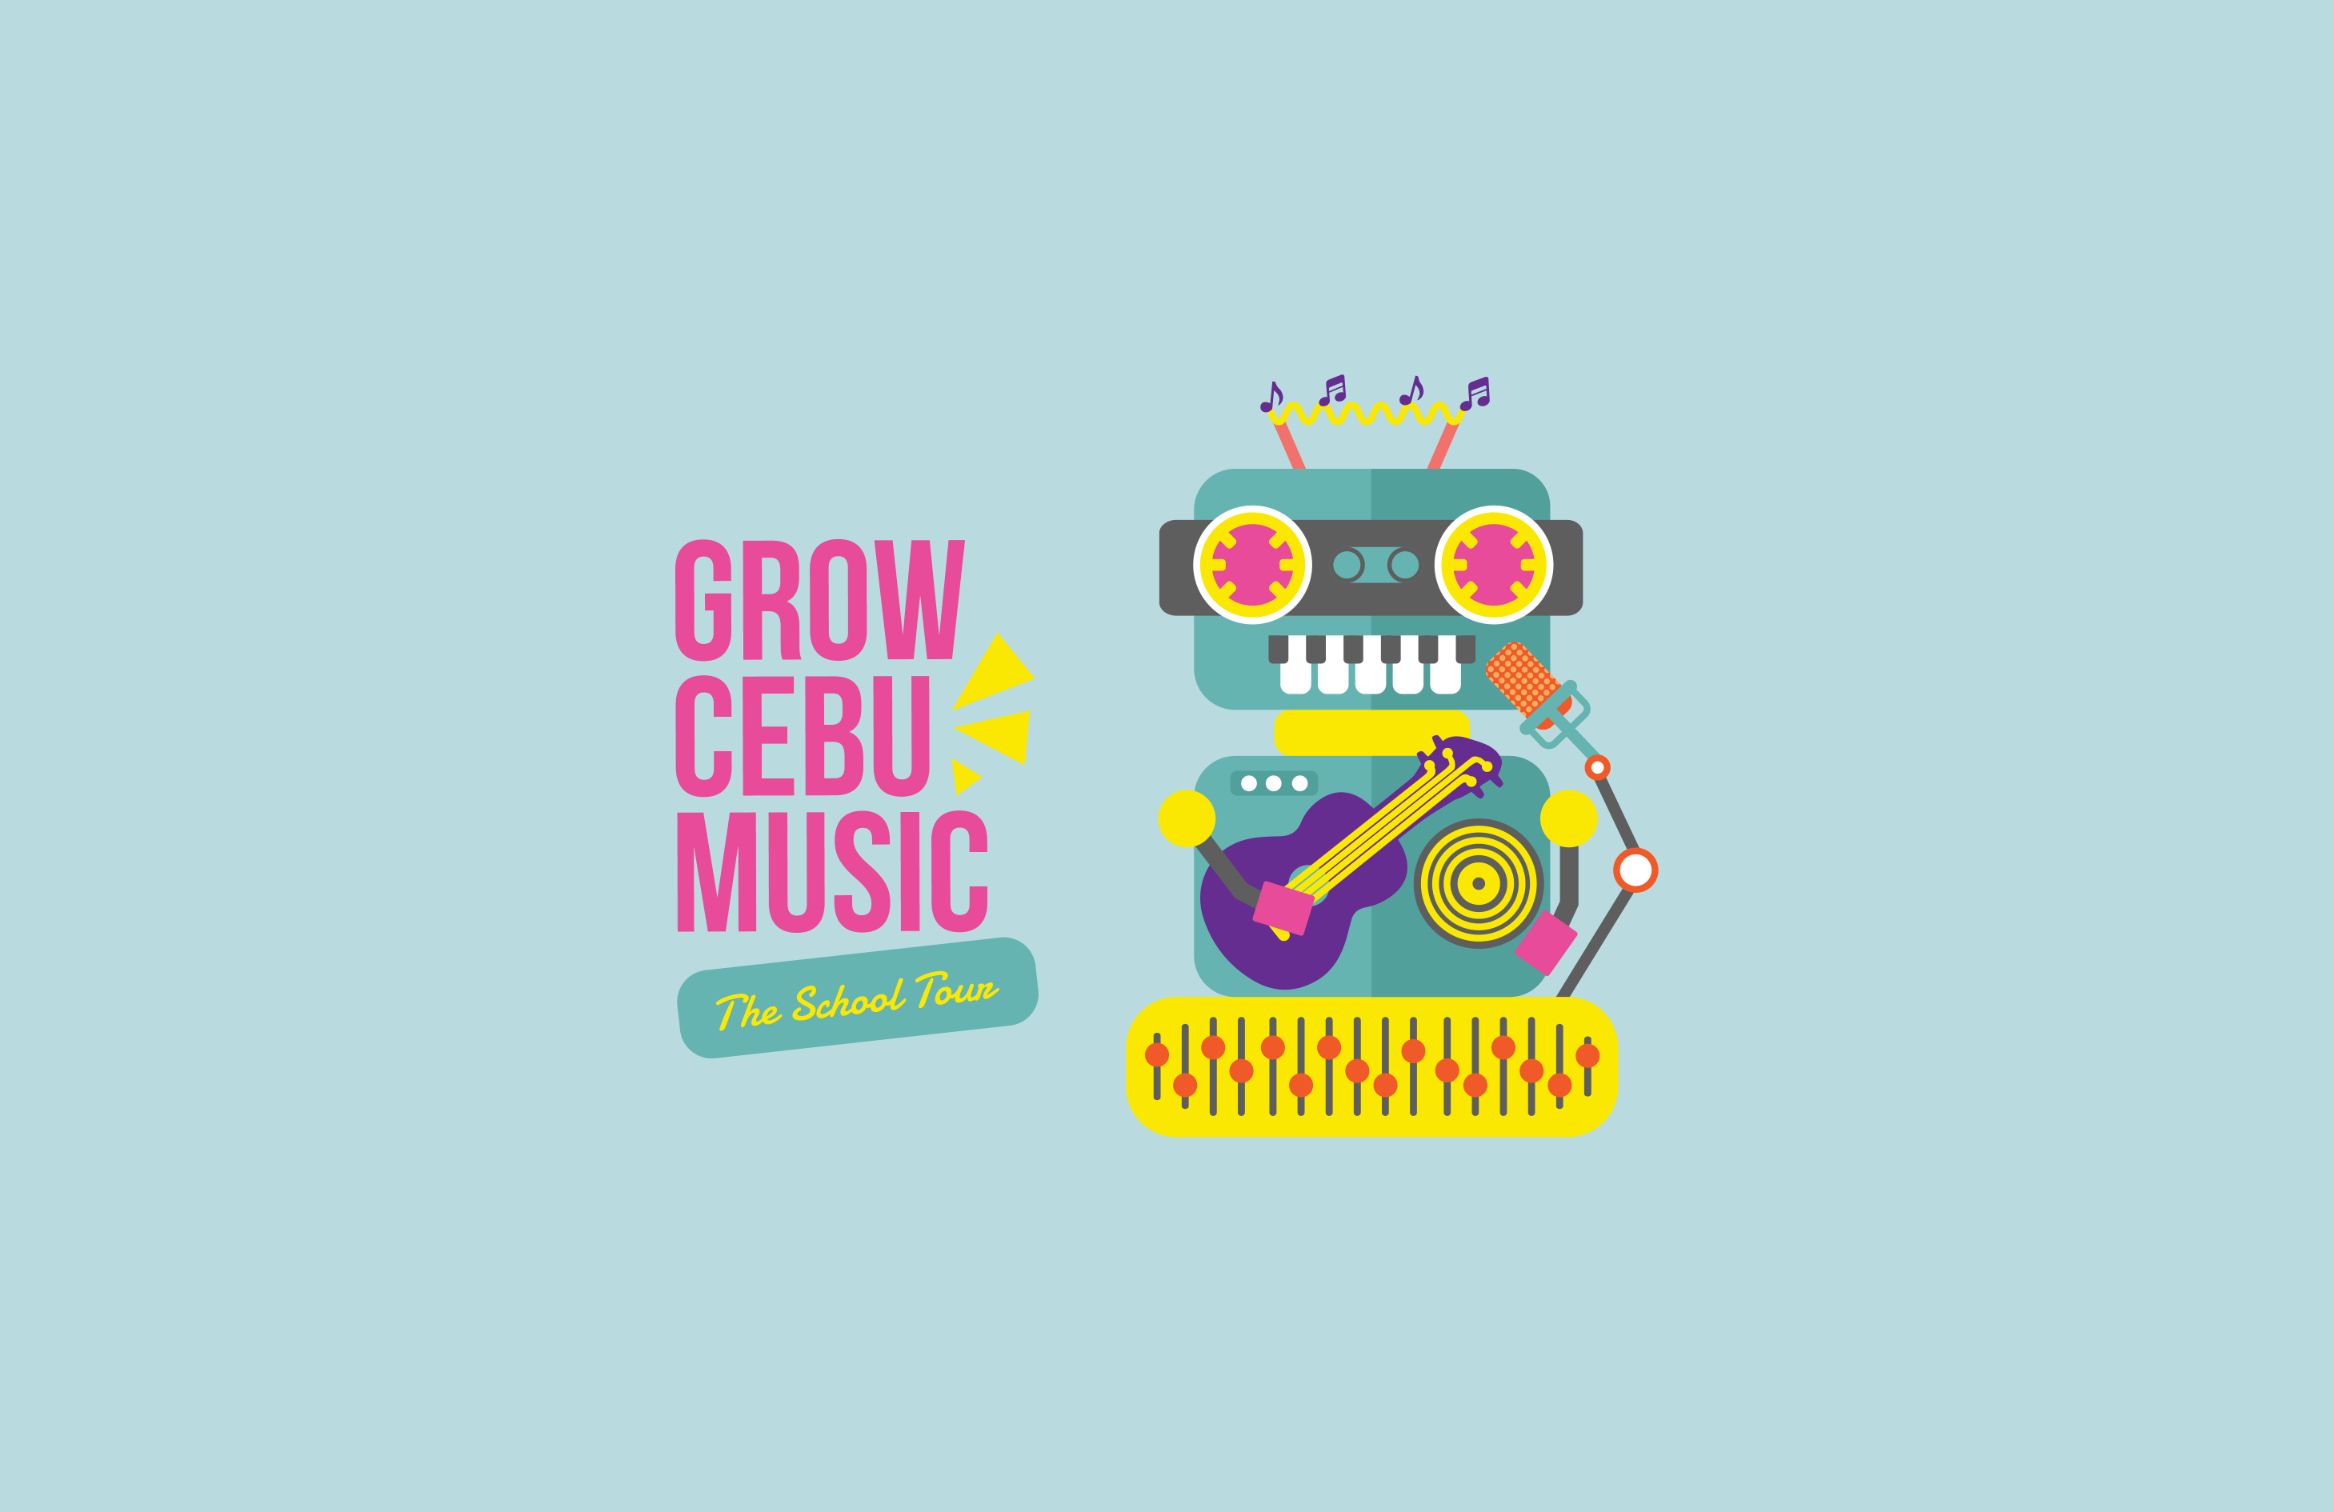 logo design of the brand with words Grow Cebu Music and the brand robot mascot